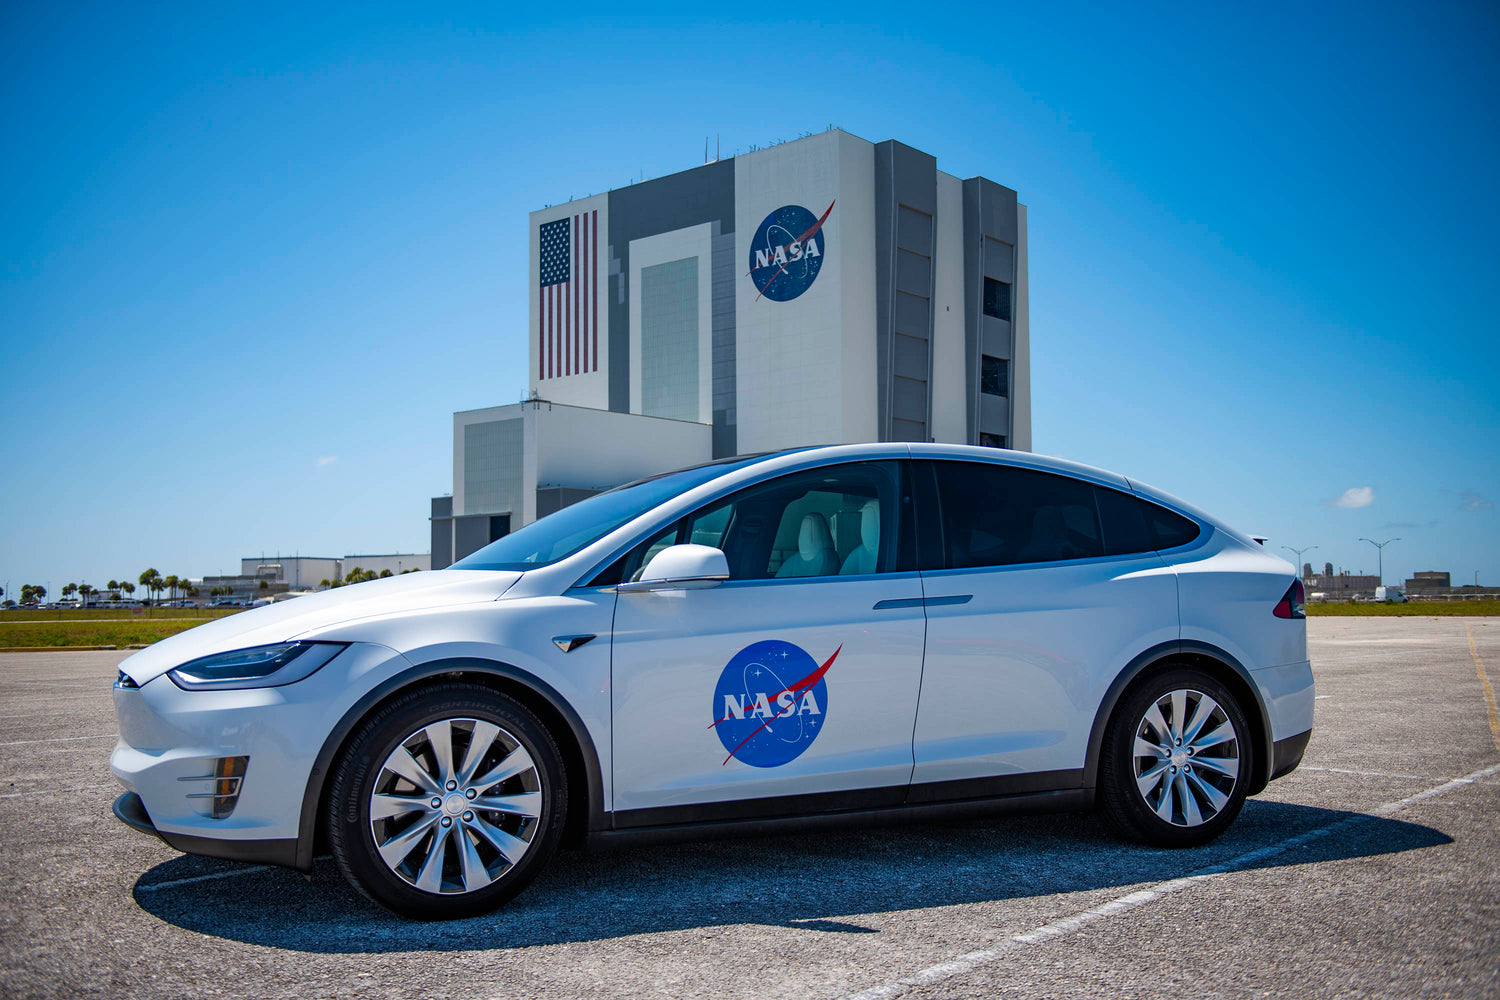 NASA Astronauts will arrive in a Tesla to the launch pad for SpaceX's first crewed mission